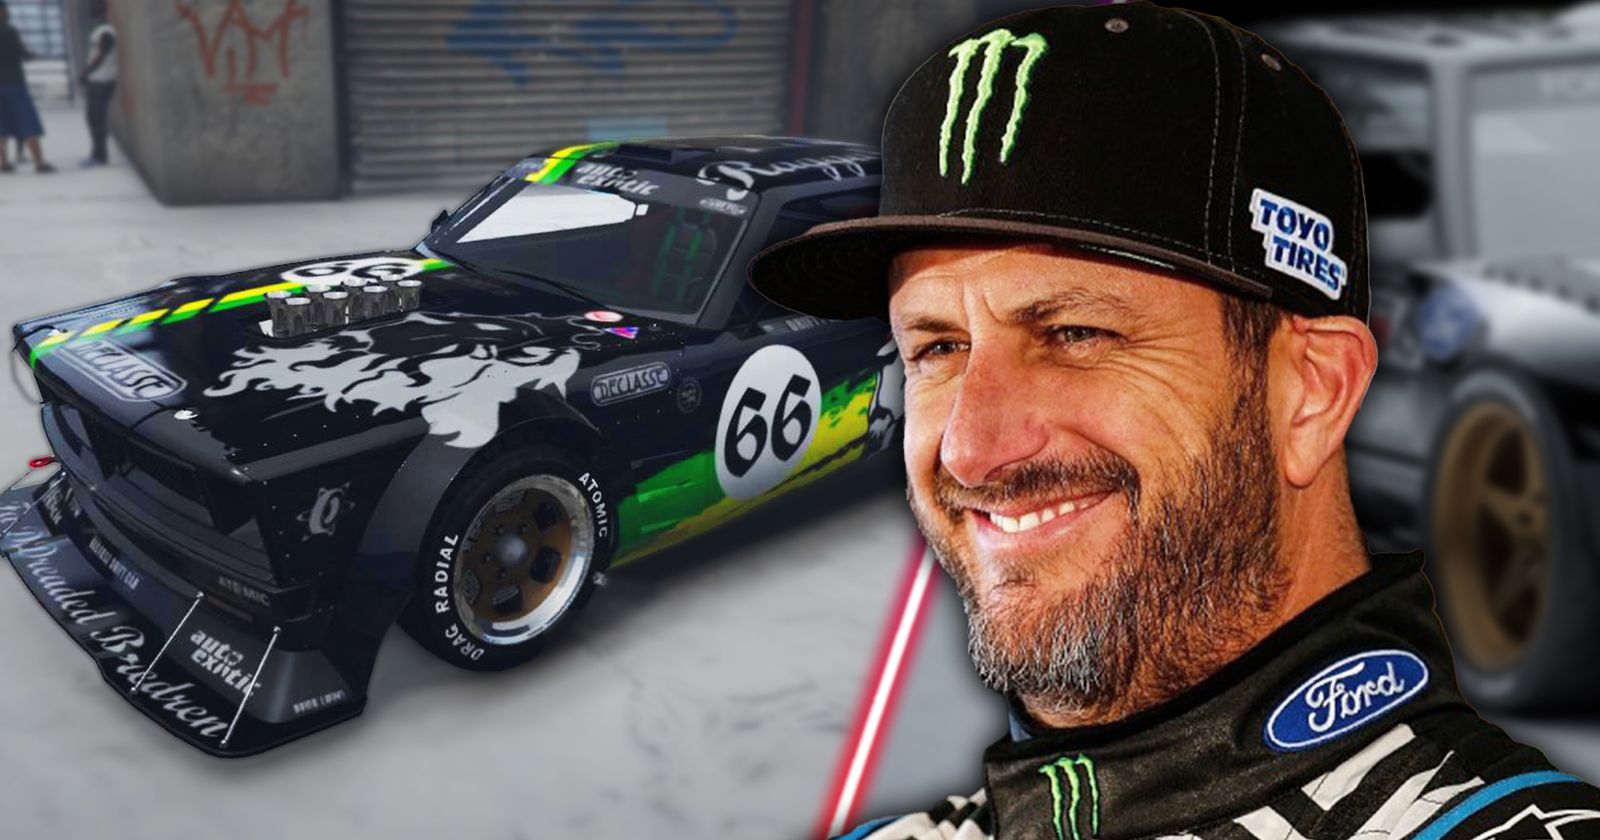 GTA Online players pay respects to Ken Block by recreating his